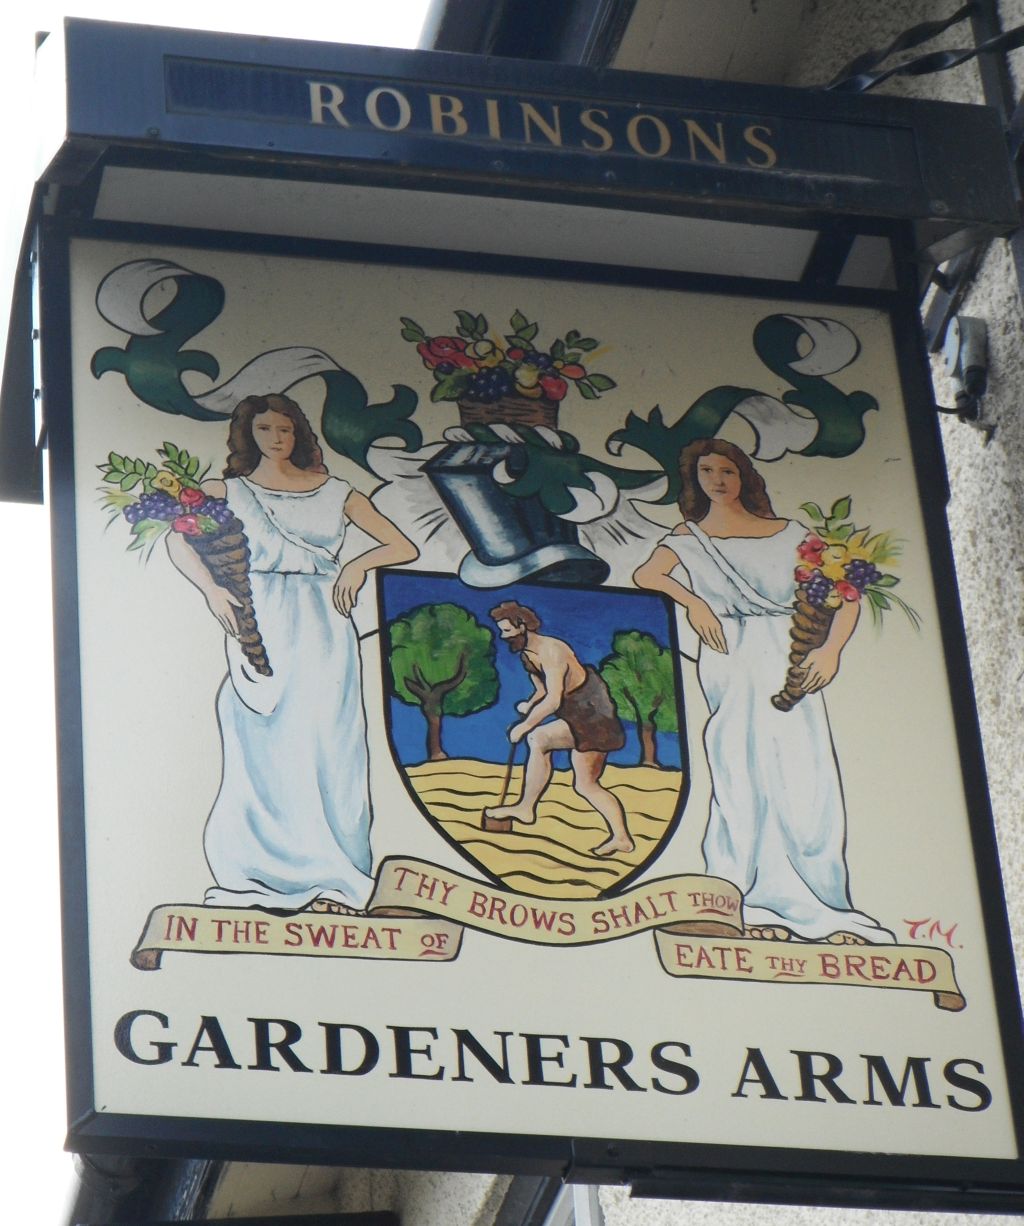 Photo taken by me – pub sign for The Gardeners Arms - Wythenshawe Manchester